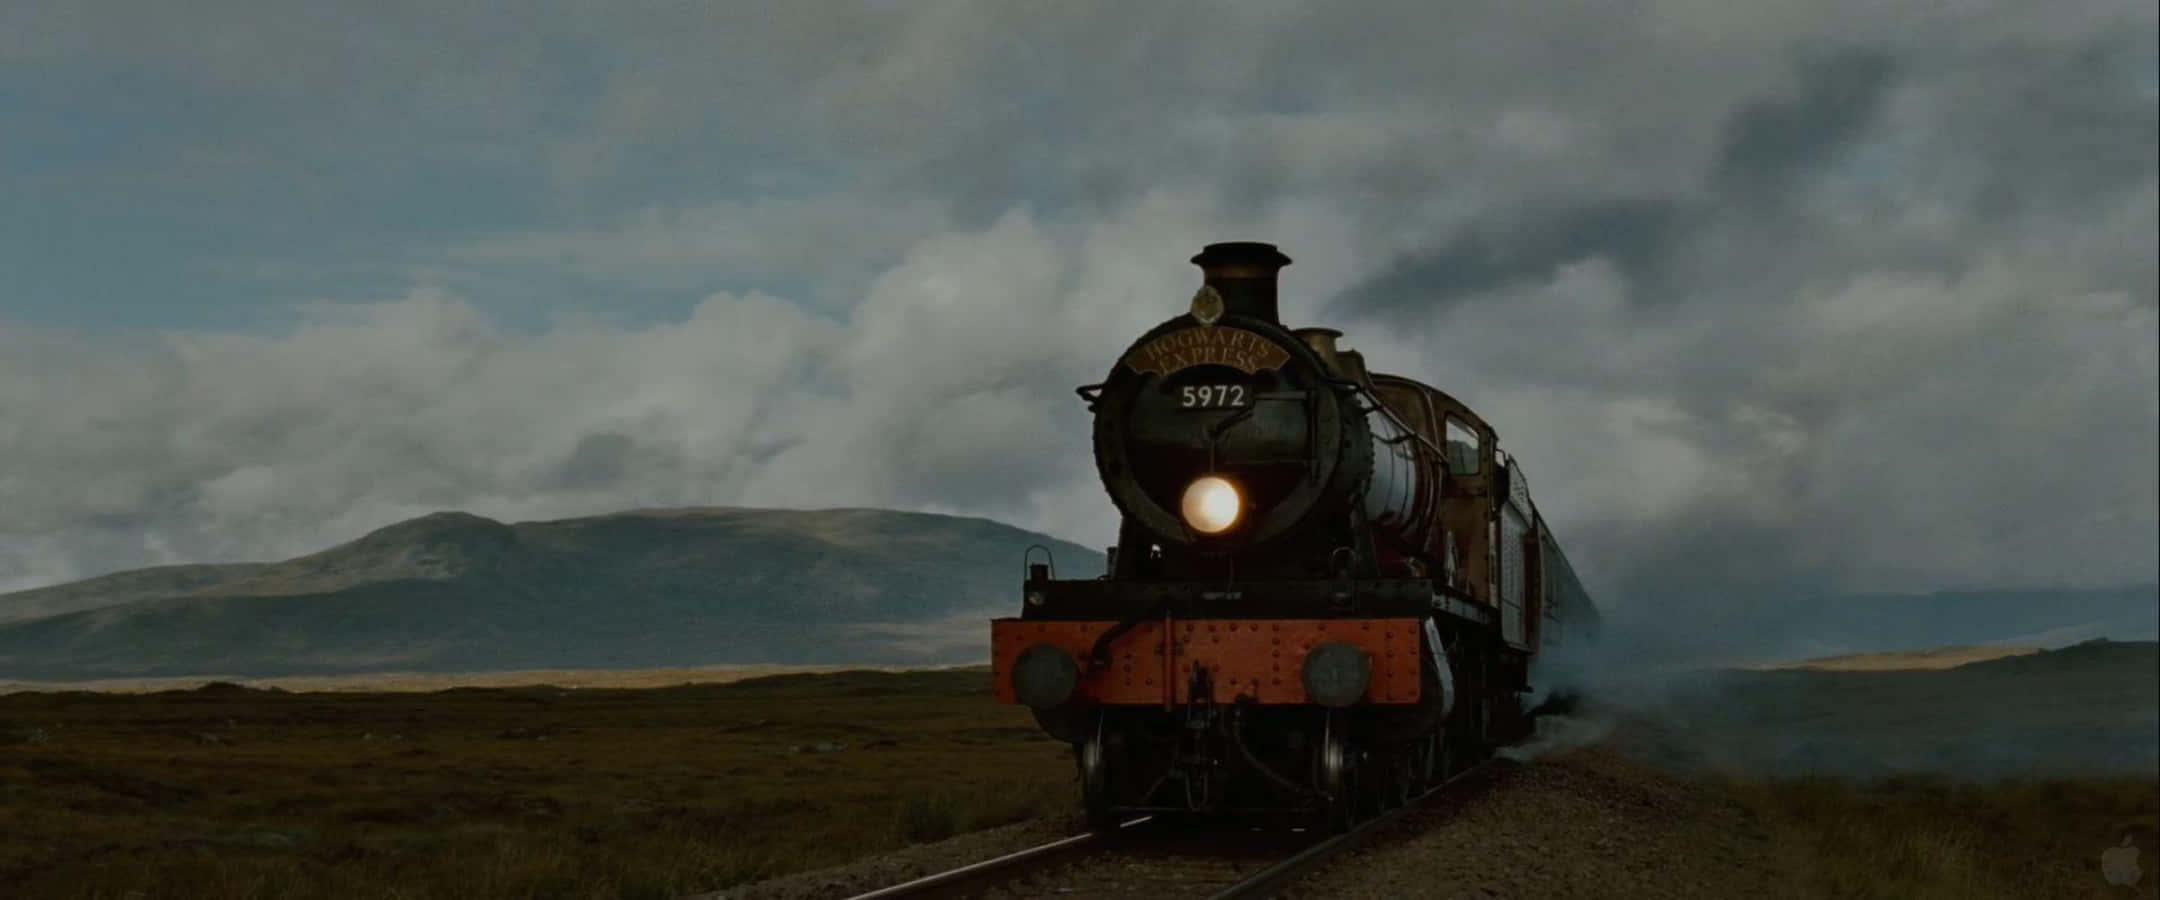 Image  The Hogwarts Express Train travelling through the Scottish Highlands Wallpaper